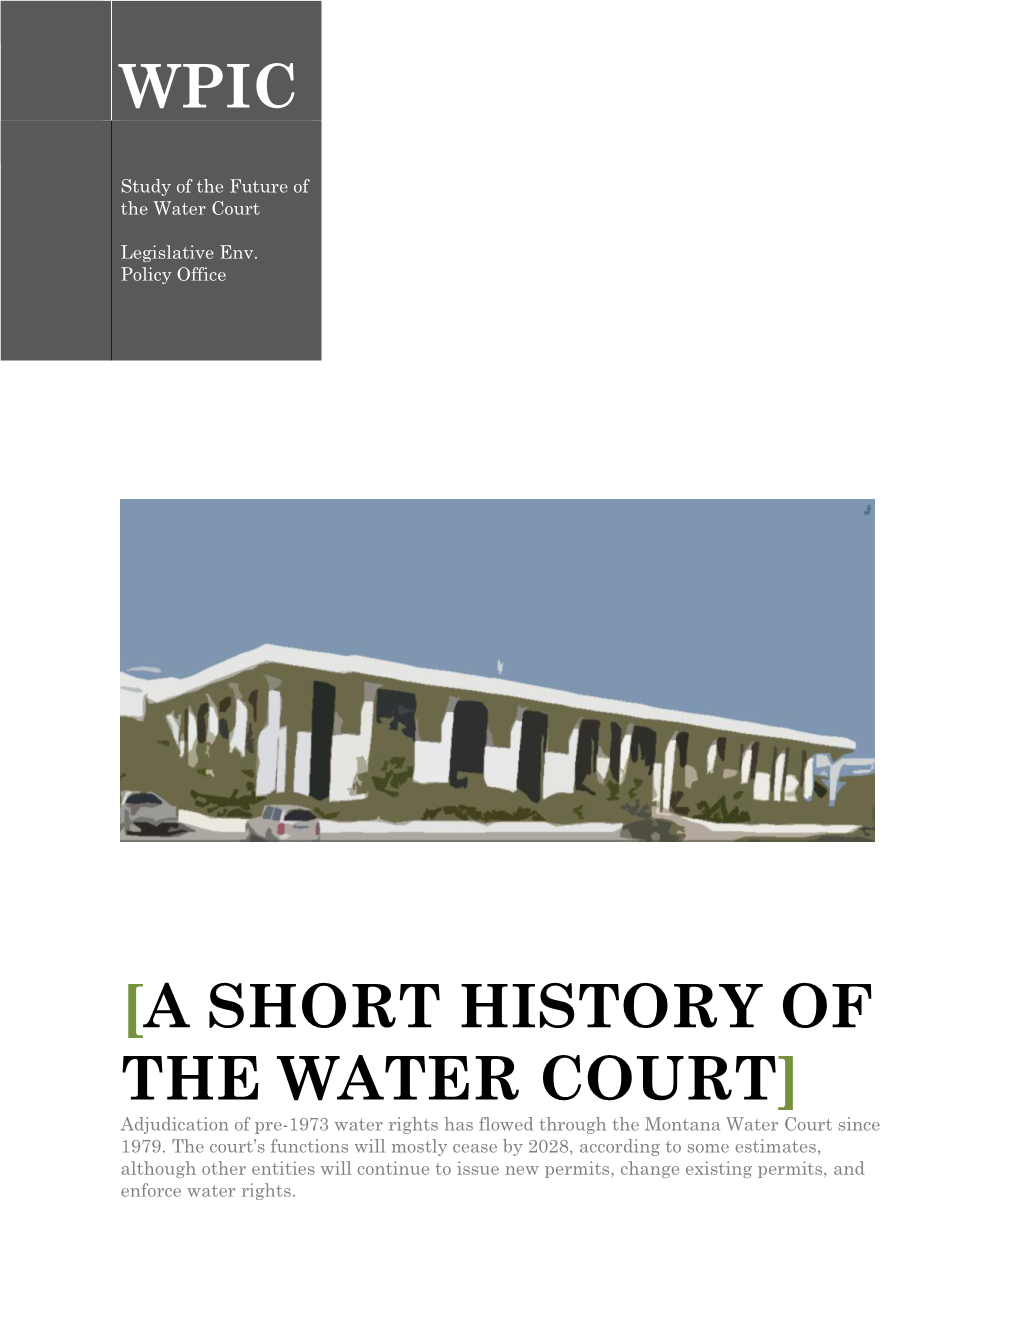 A SHORT HISTORY of the WATER COURT] Adjudication of Pre-1973 Water Rights Has Flowed Through the Montana Water Court Since 1979